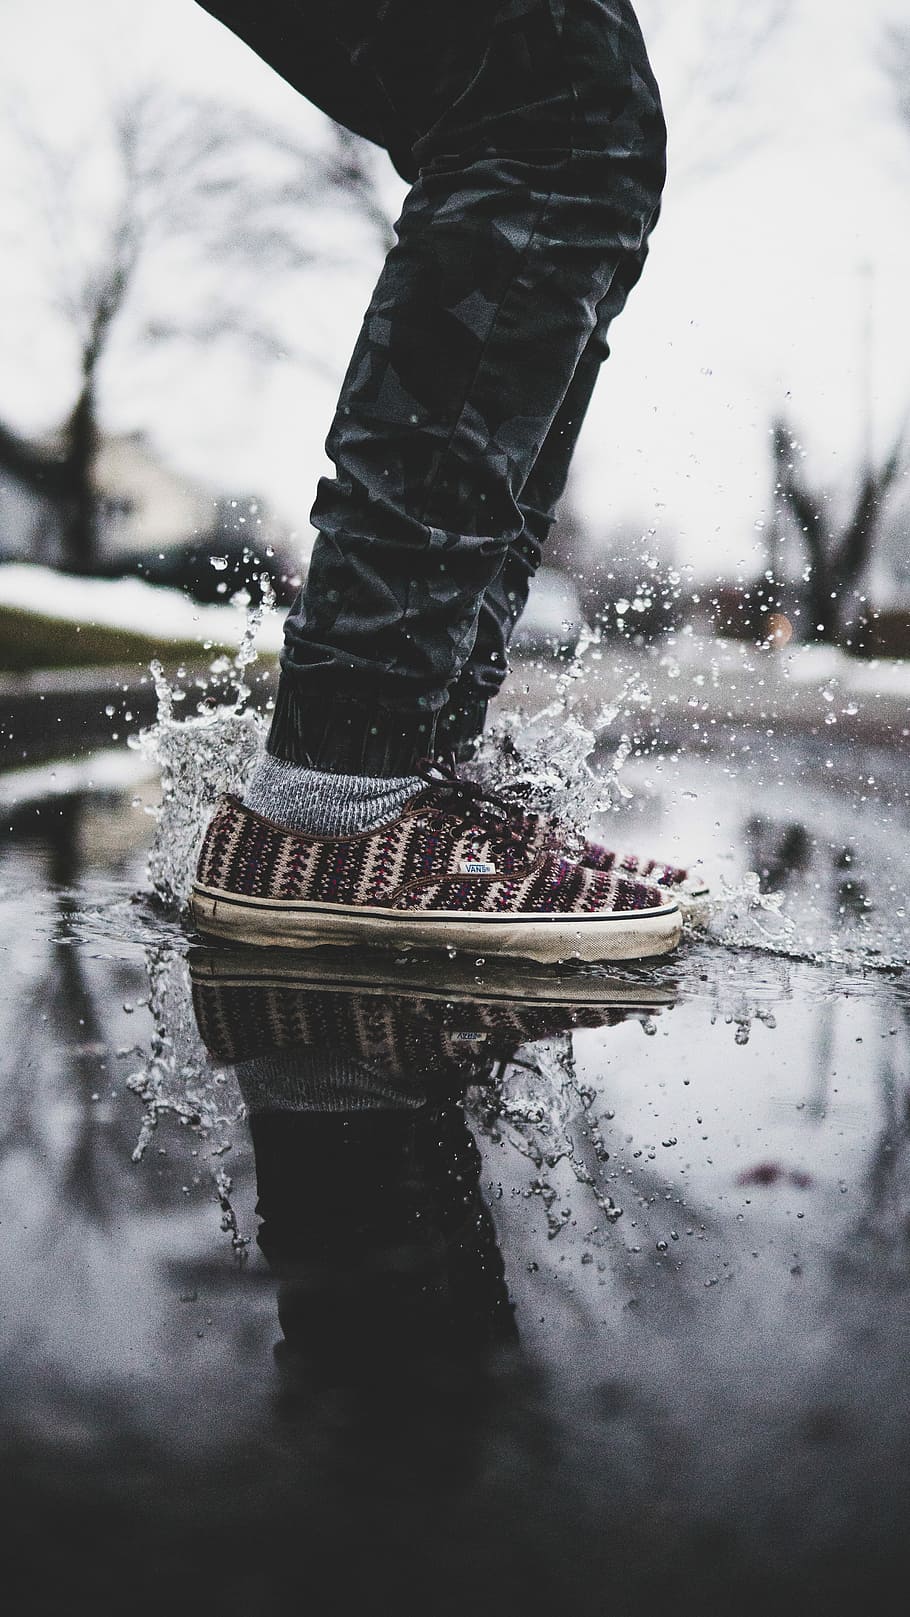 person wearing black pants and black-and-white low-top sneakers on wet floor, person splashing the water under white cloudy sky photo